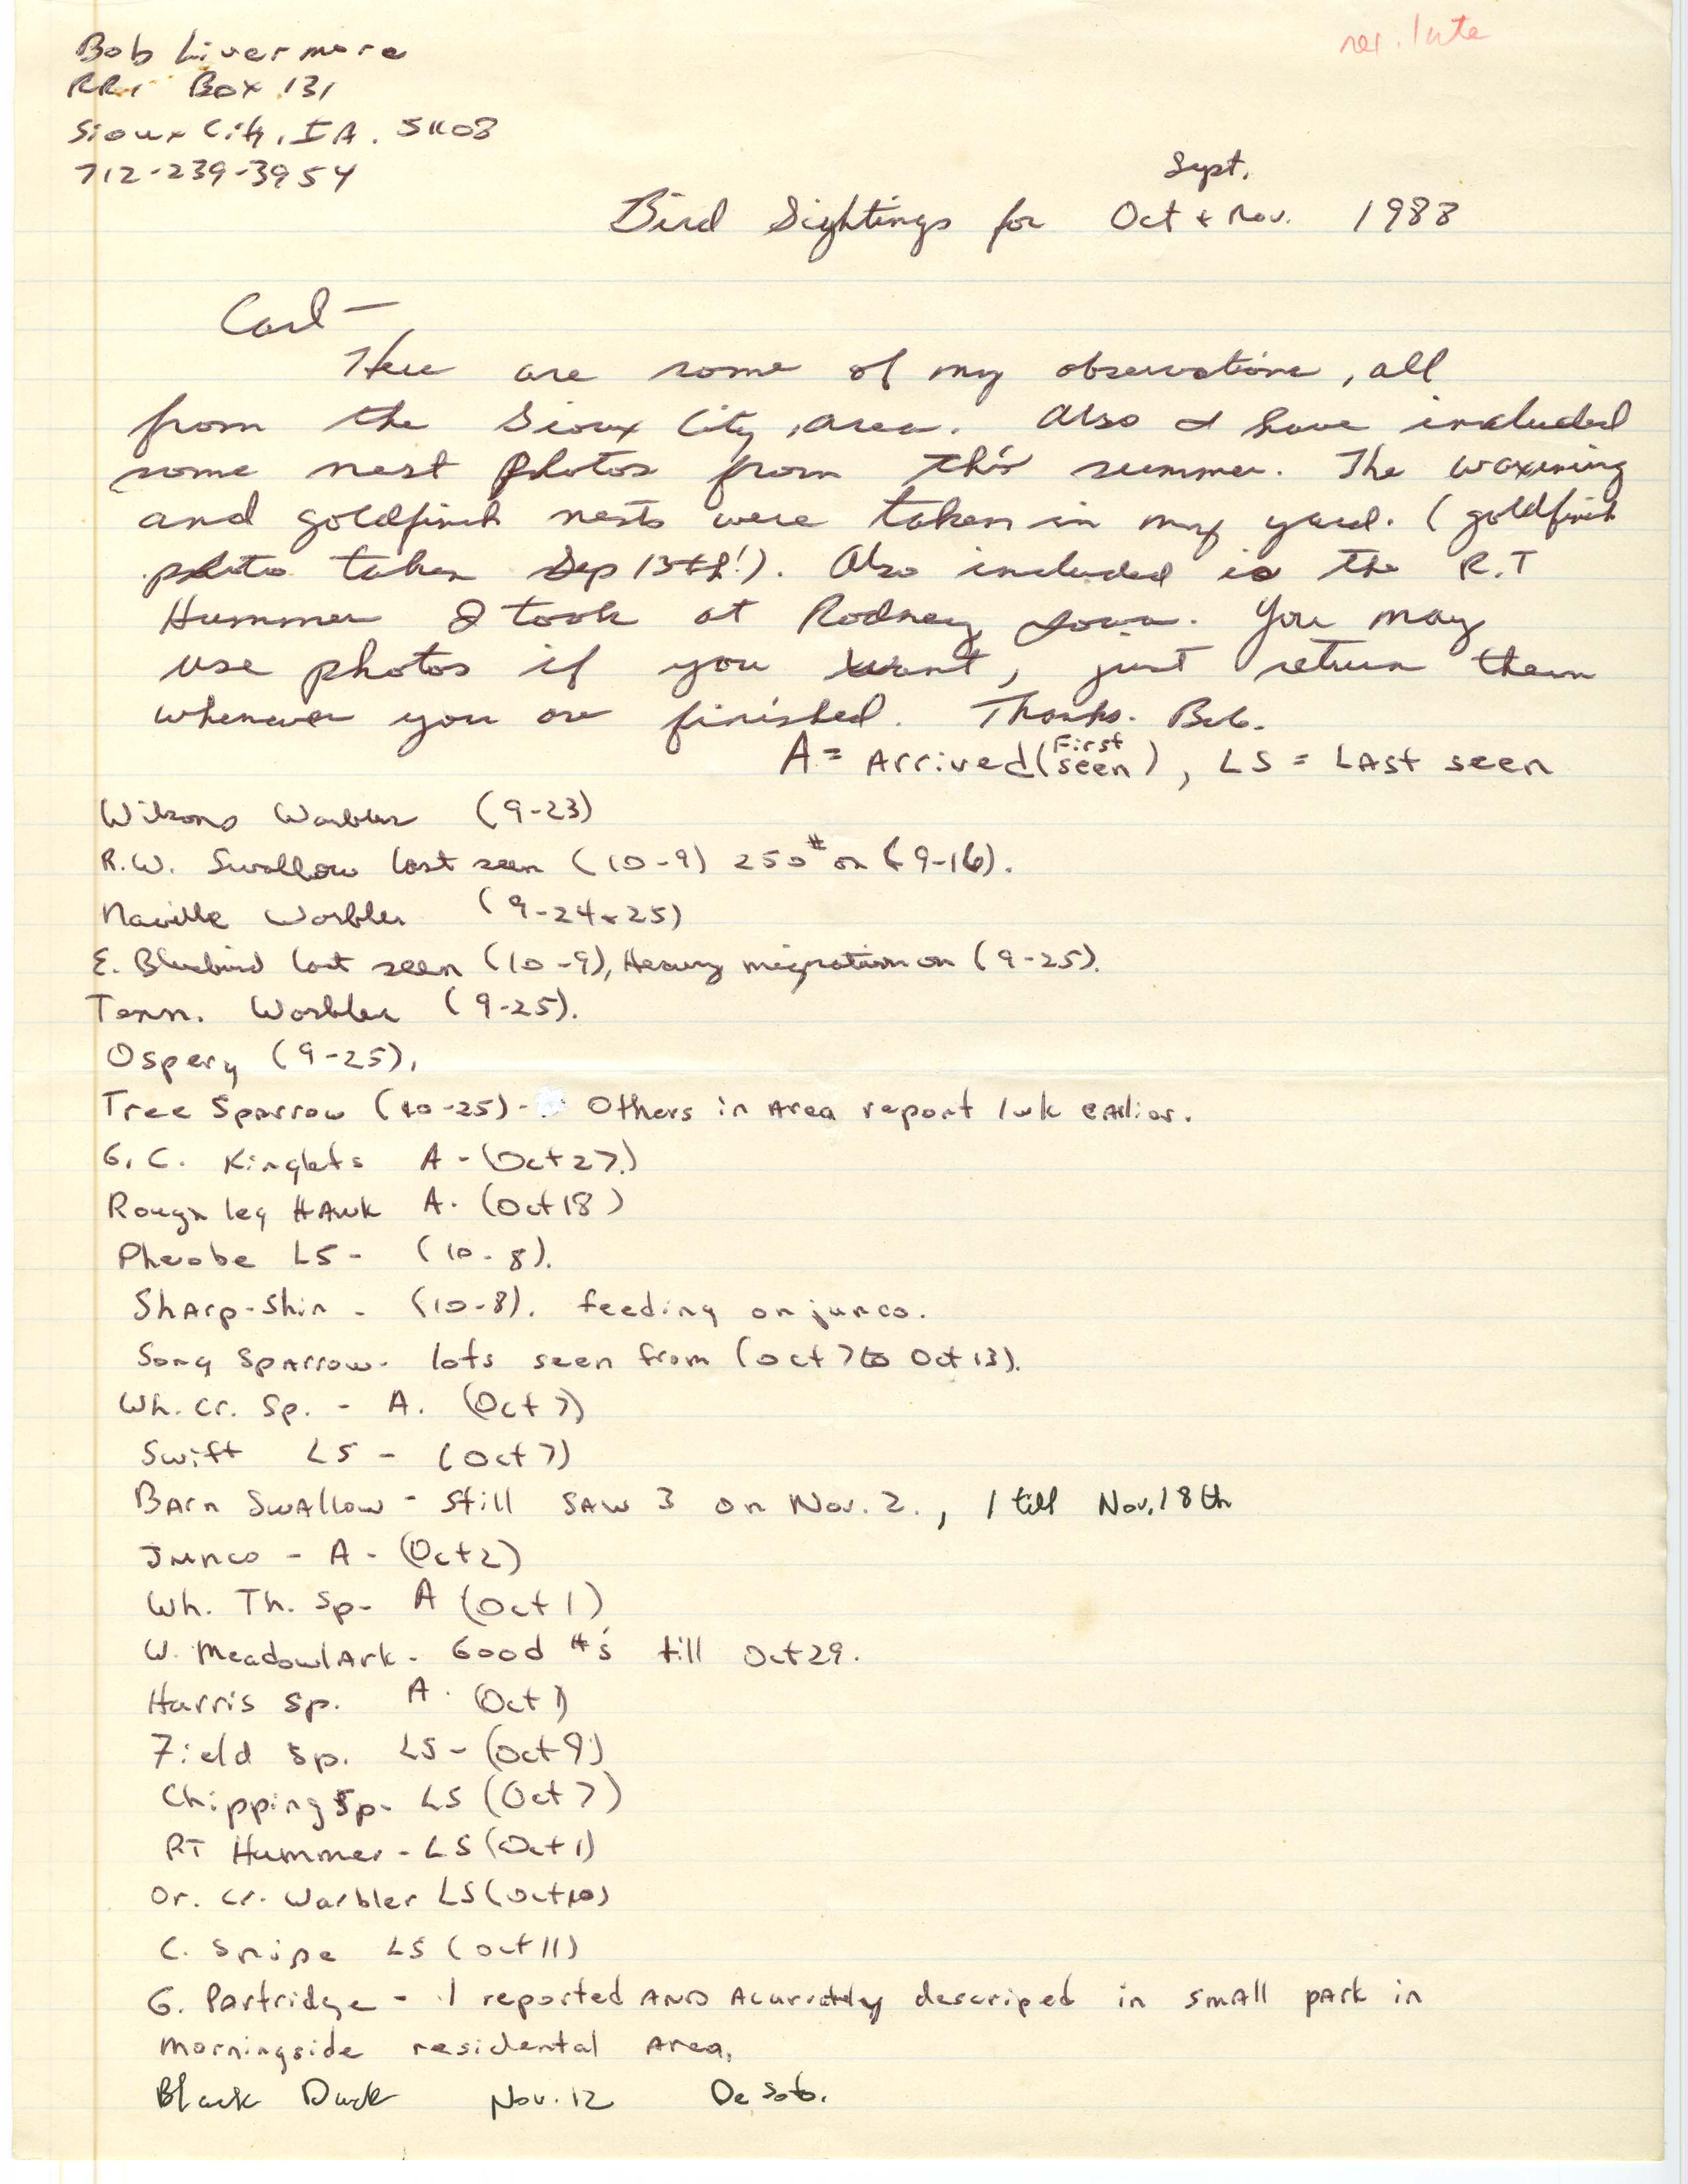 Field notes and Bob Livermore letter to Carl J. Bendorf, fall 1988